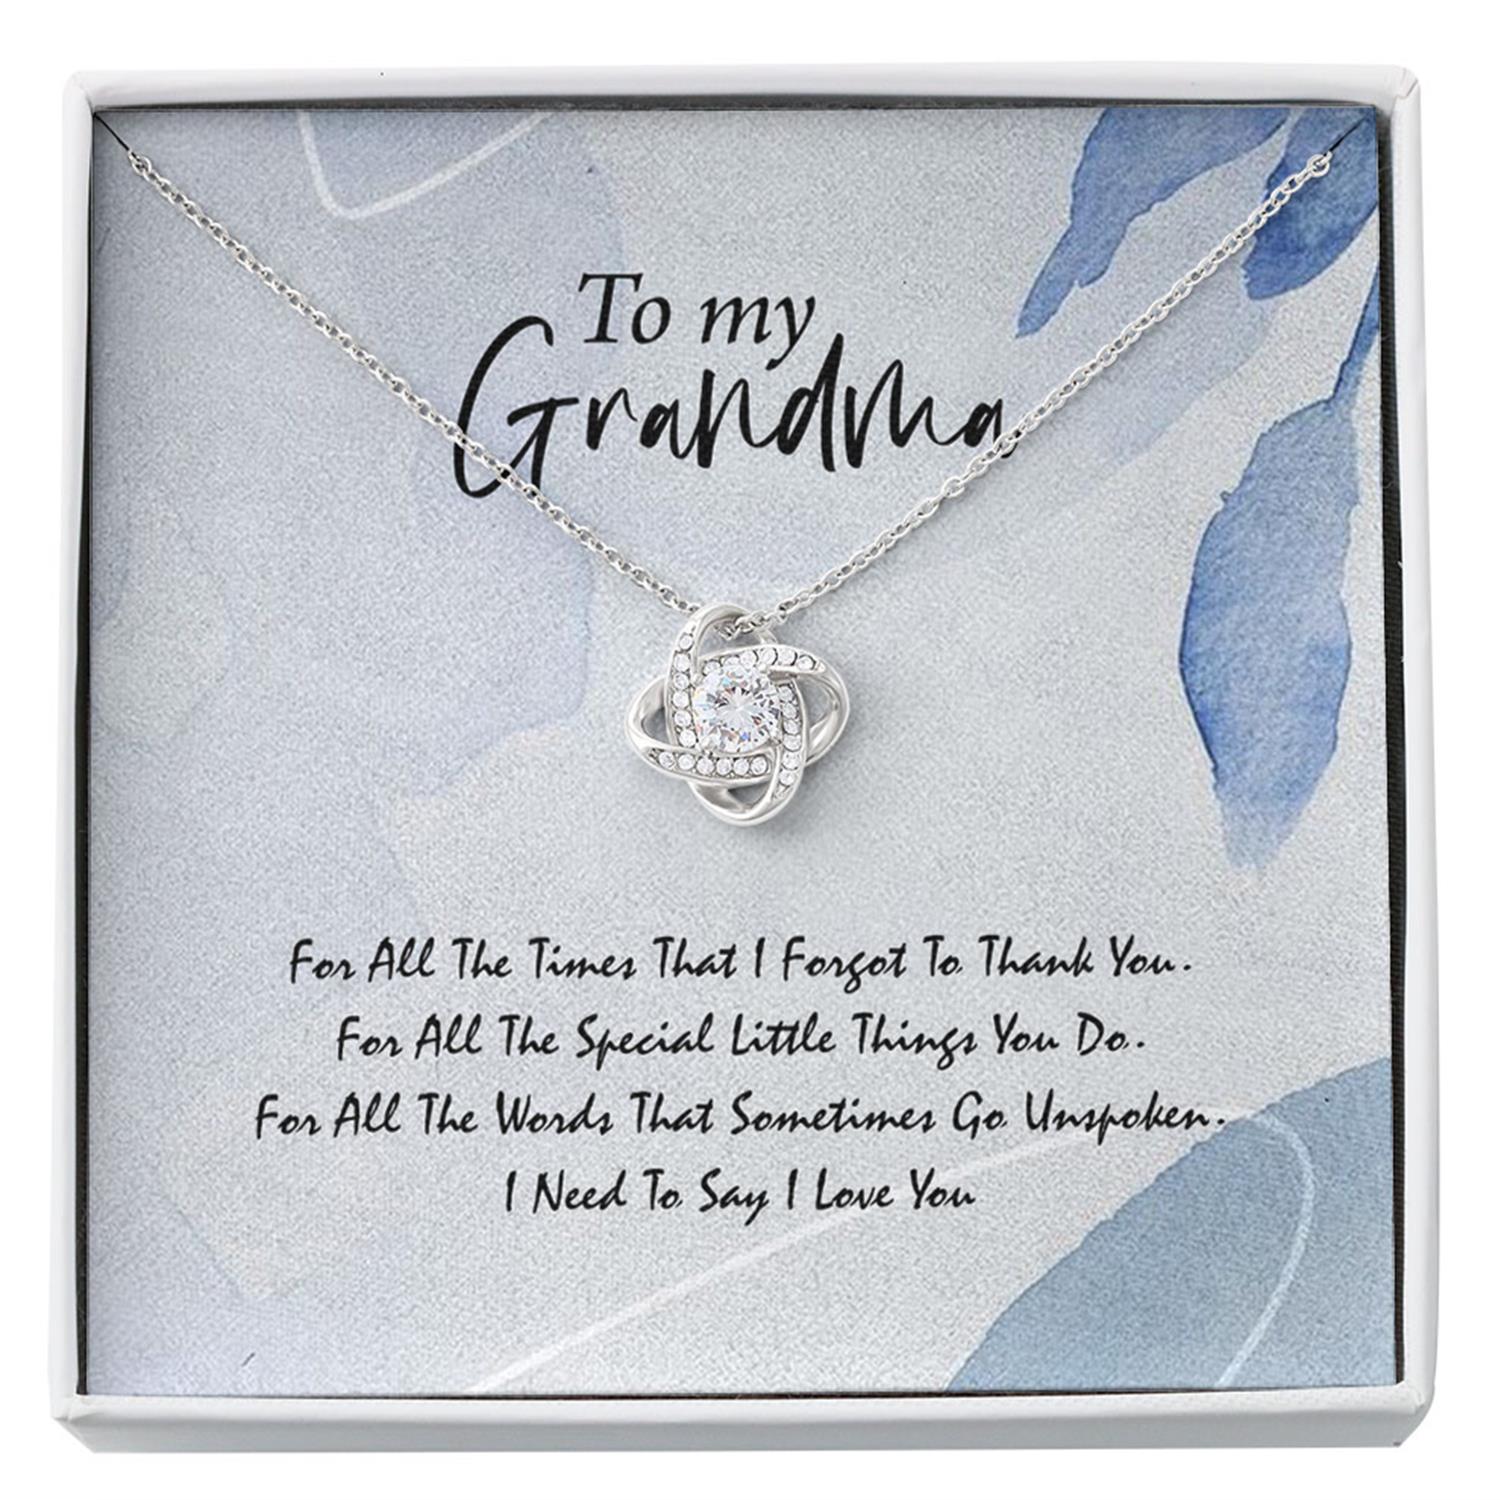 Grandmother Necklace, Necklace For Grandma - To My Grandma Love Knot Necklace With Gift Box Custom Necklace